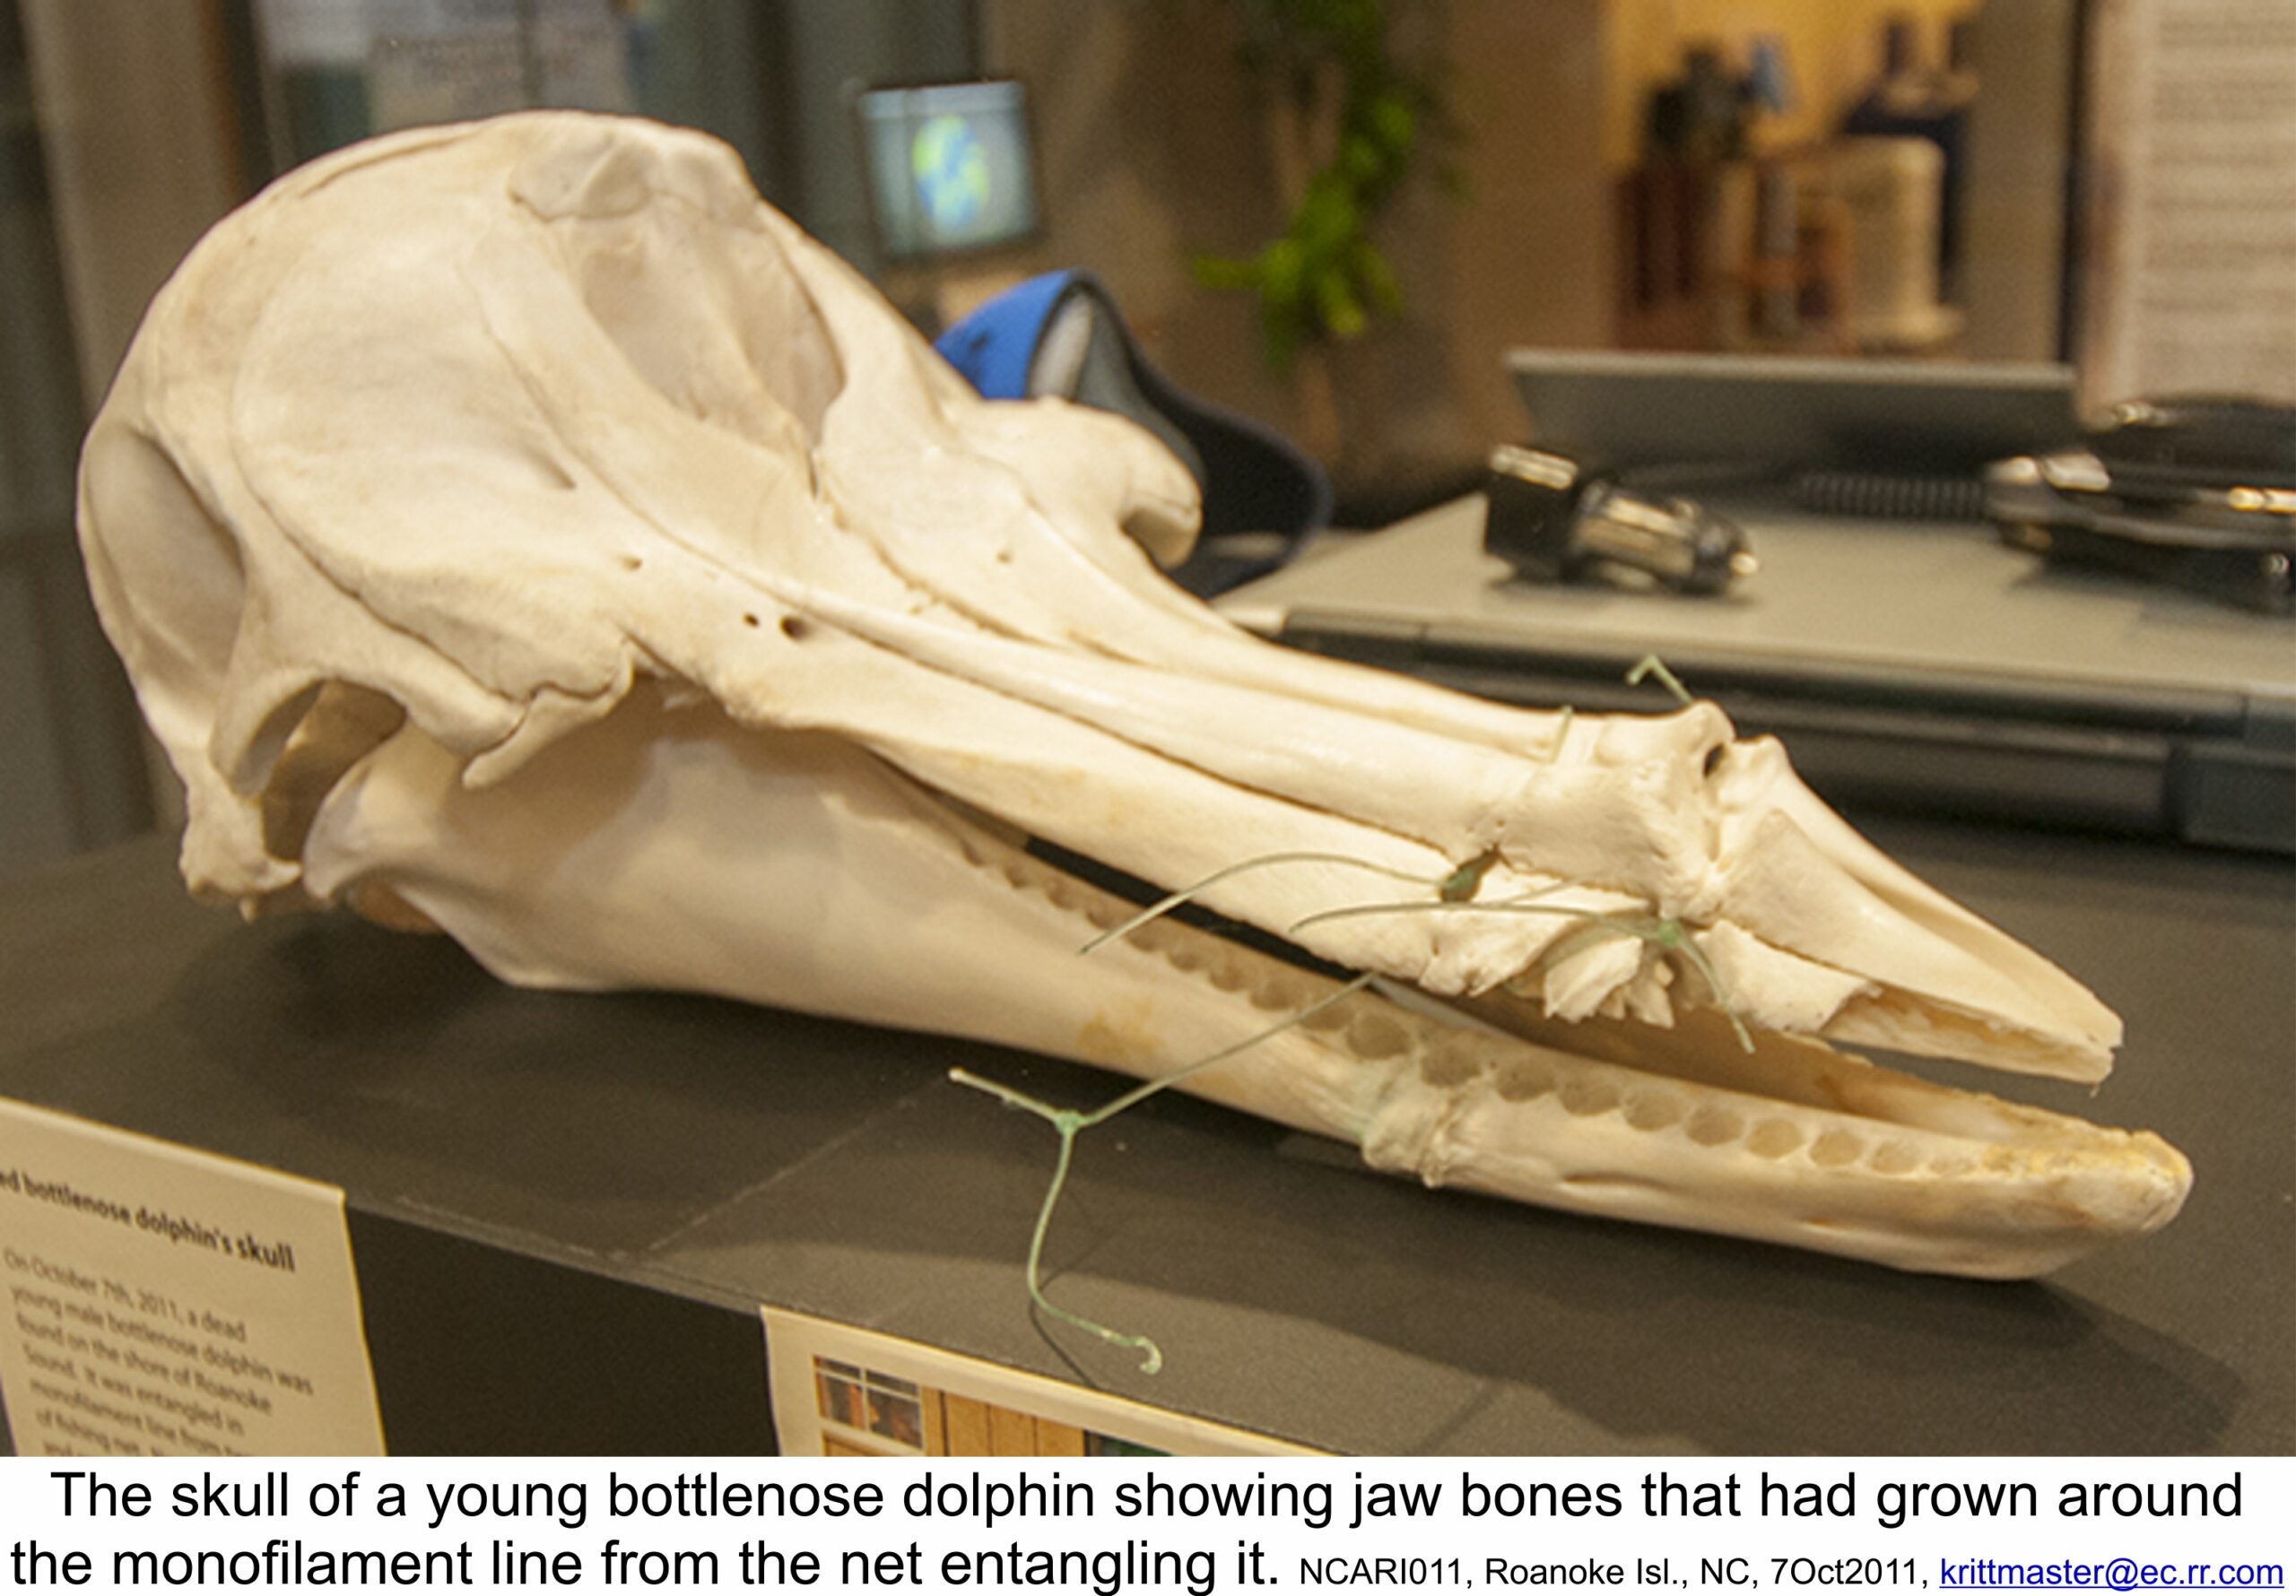 The skull of the yearling bottlenose dolphin showing bone having grown around the entangling line that was killing it.